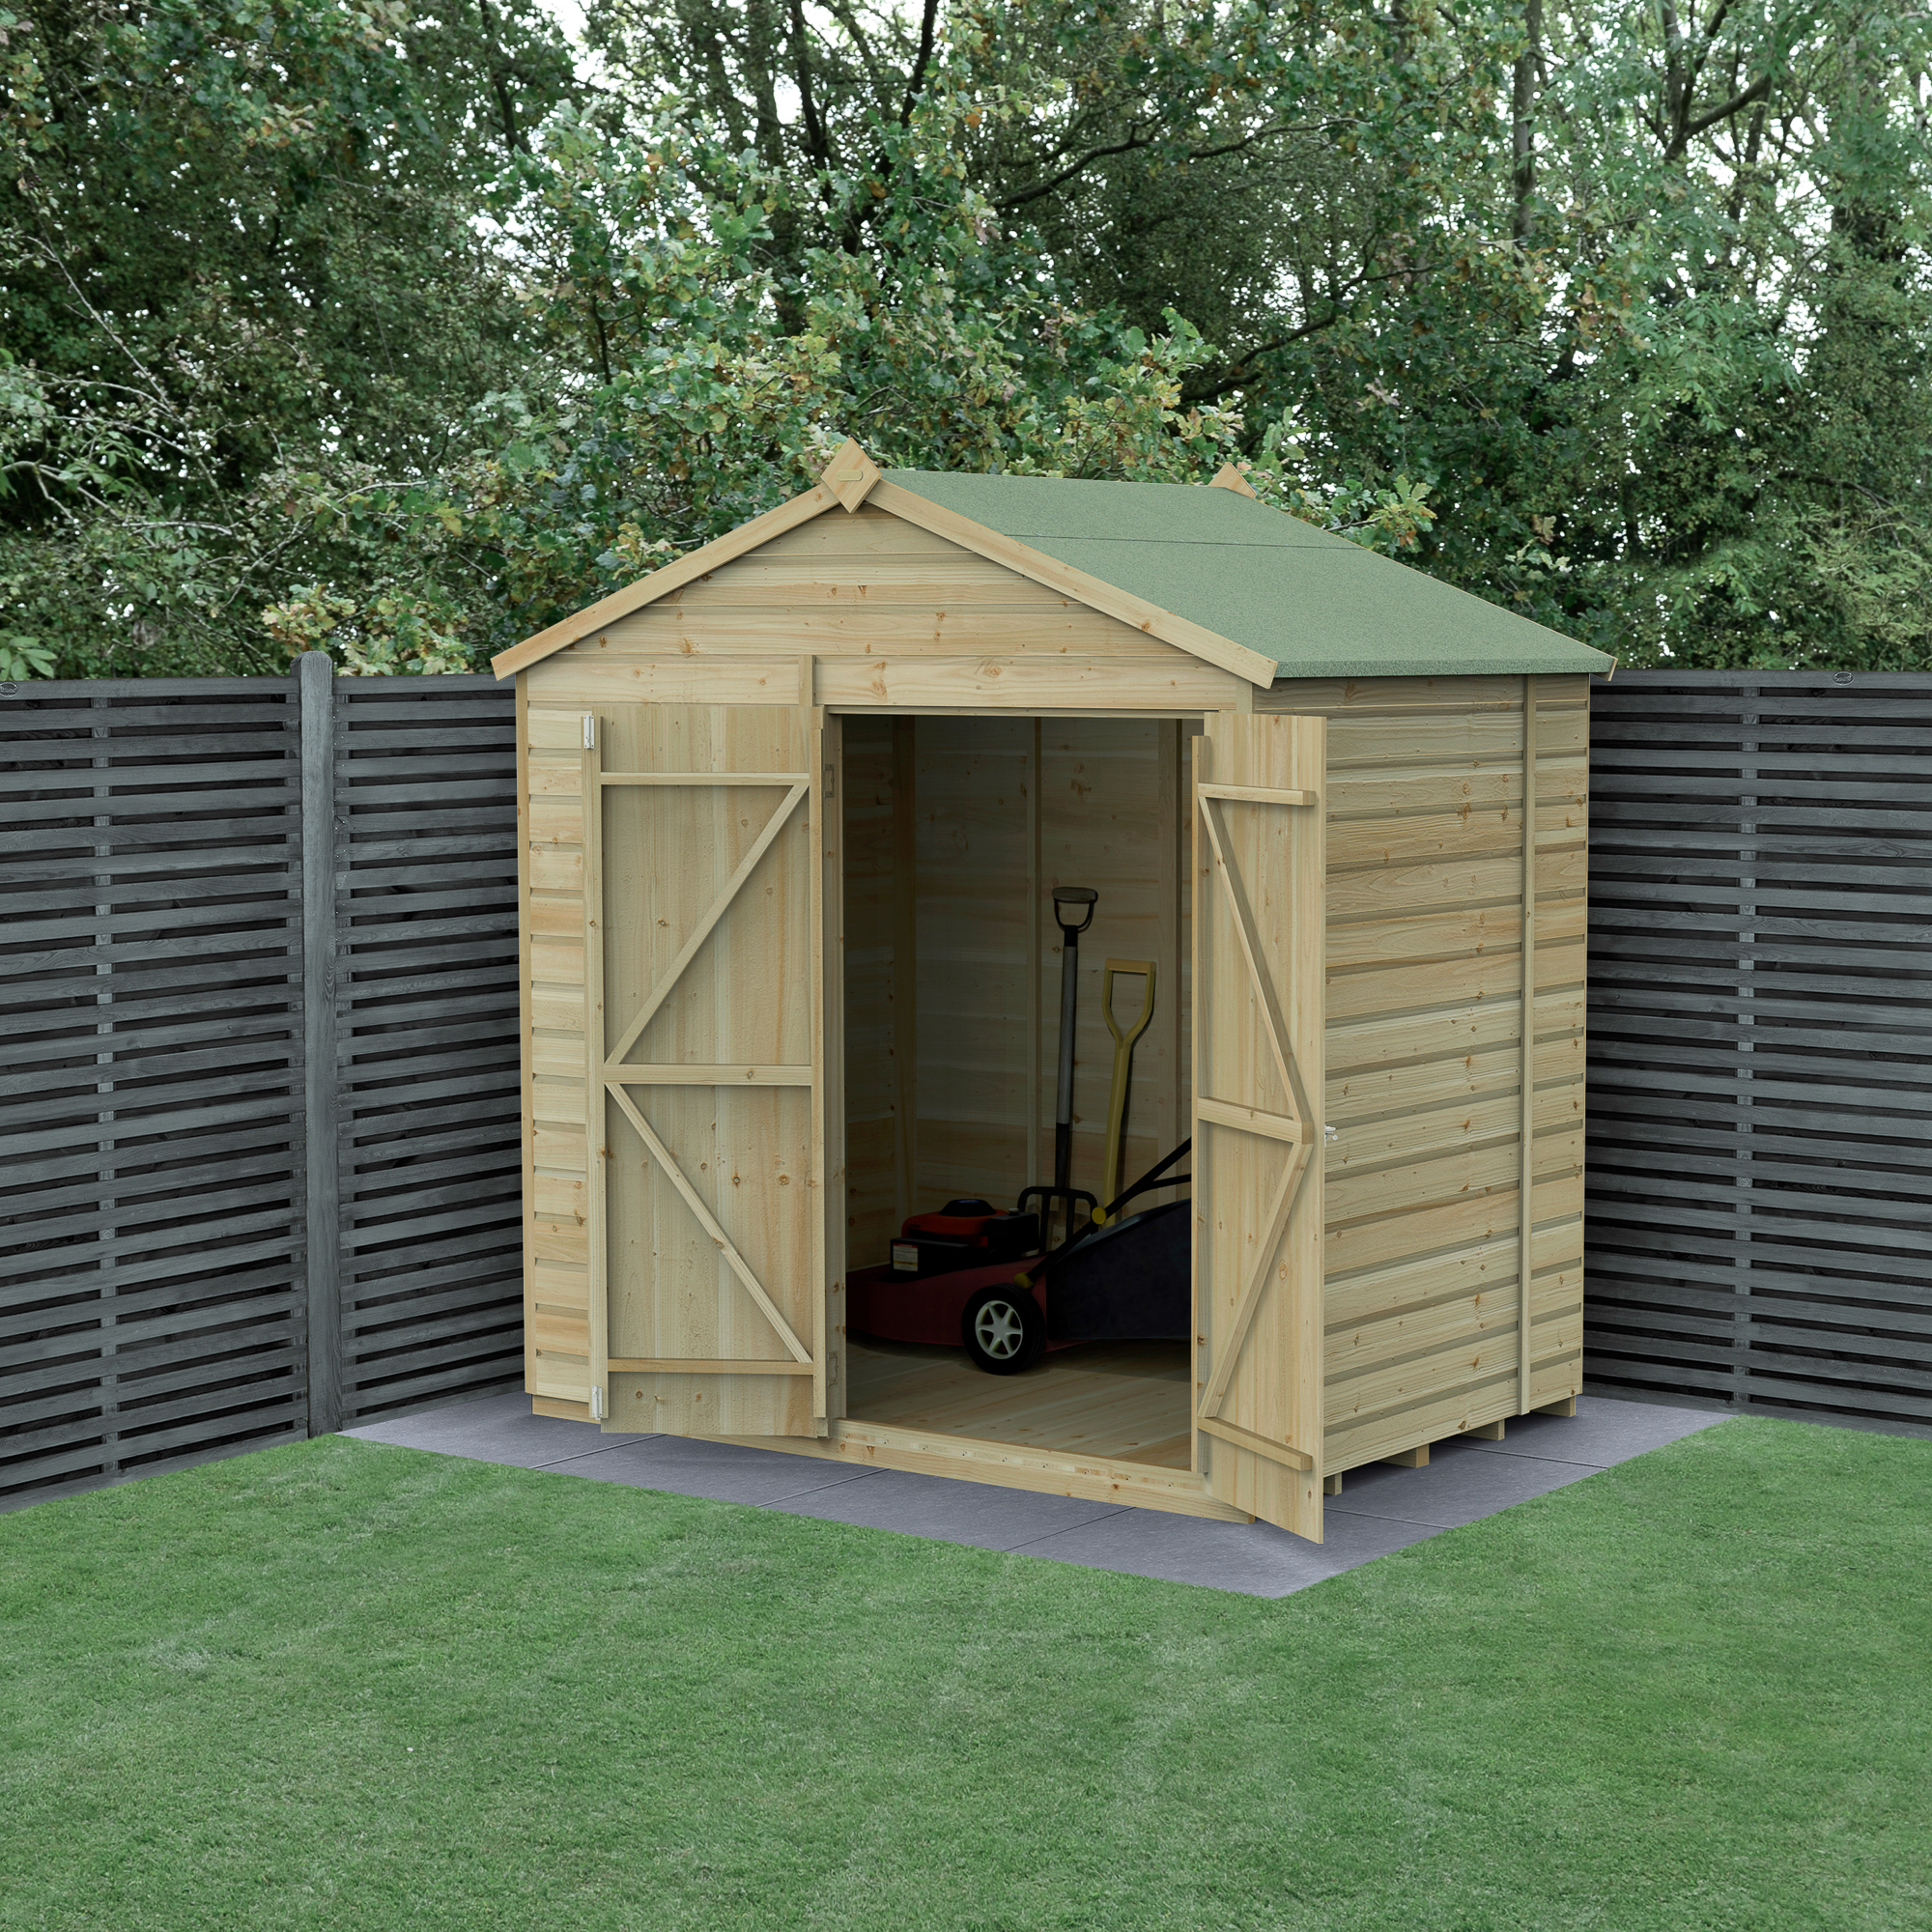 Forest Garden Beckwood 7 x 5ft Apex Shiplap Pressure Treated Double Door Windowless Shed